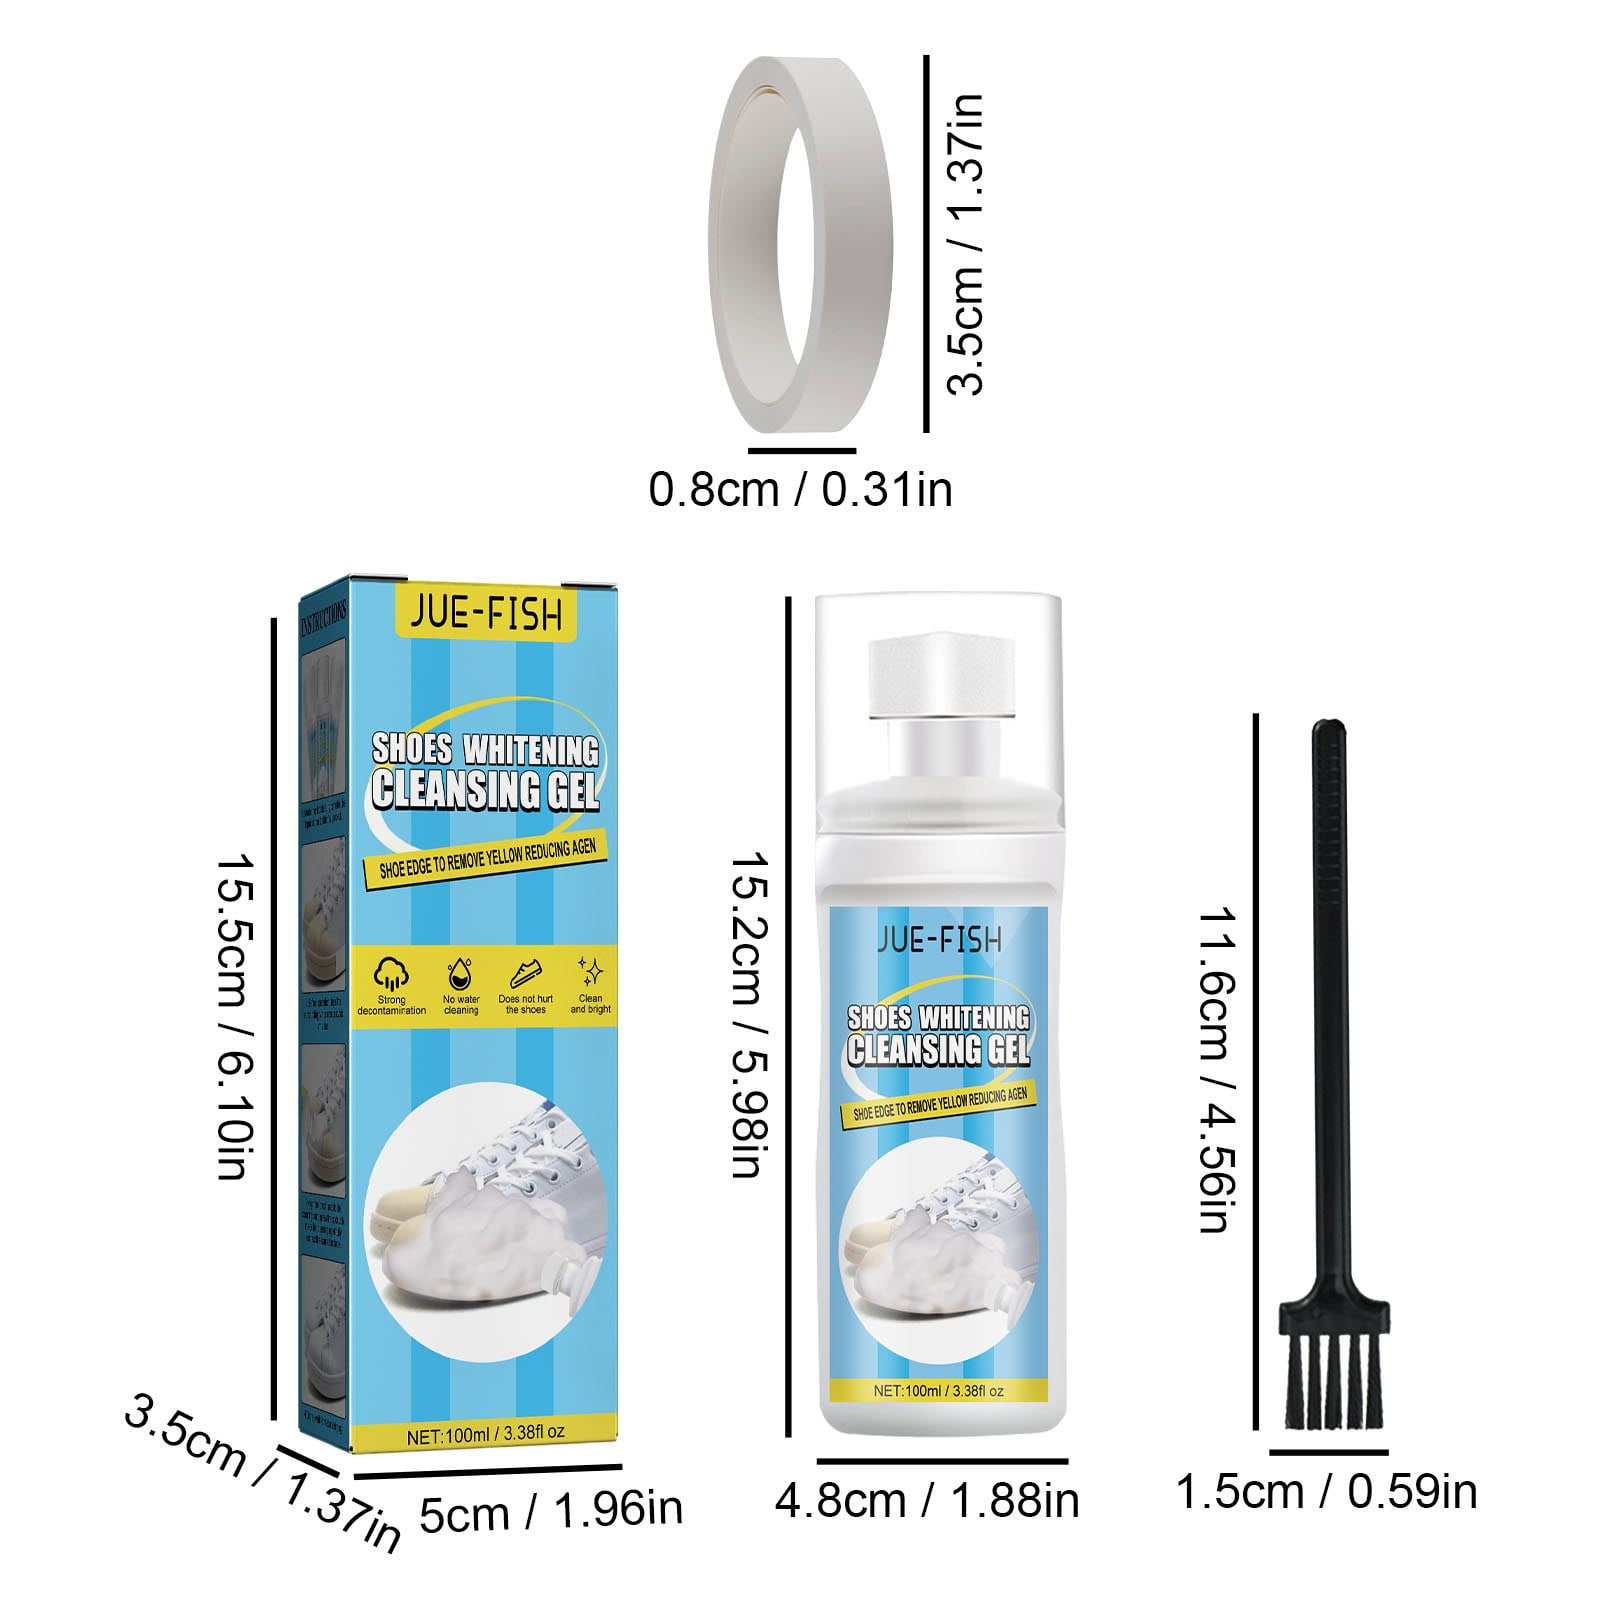 1pc Shoes Cleaner White Shoe Cleaner Shoe Whitener Sneaker Cleaner Shoe  Edge Cleaner White Shoes Brightening Sneaker Whitener White Sneaker Cleaner  Cleaning Tools, Discounts For Everyone